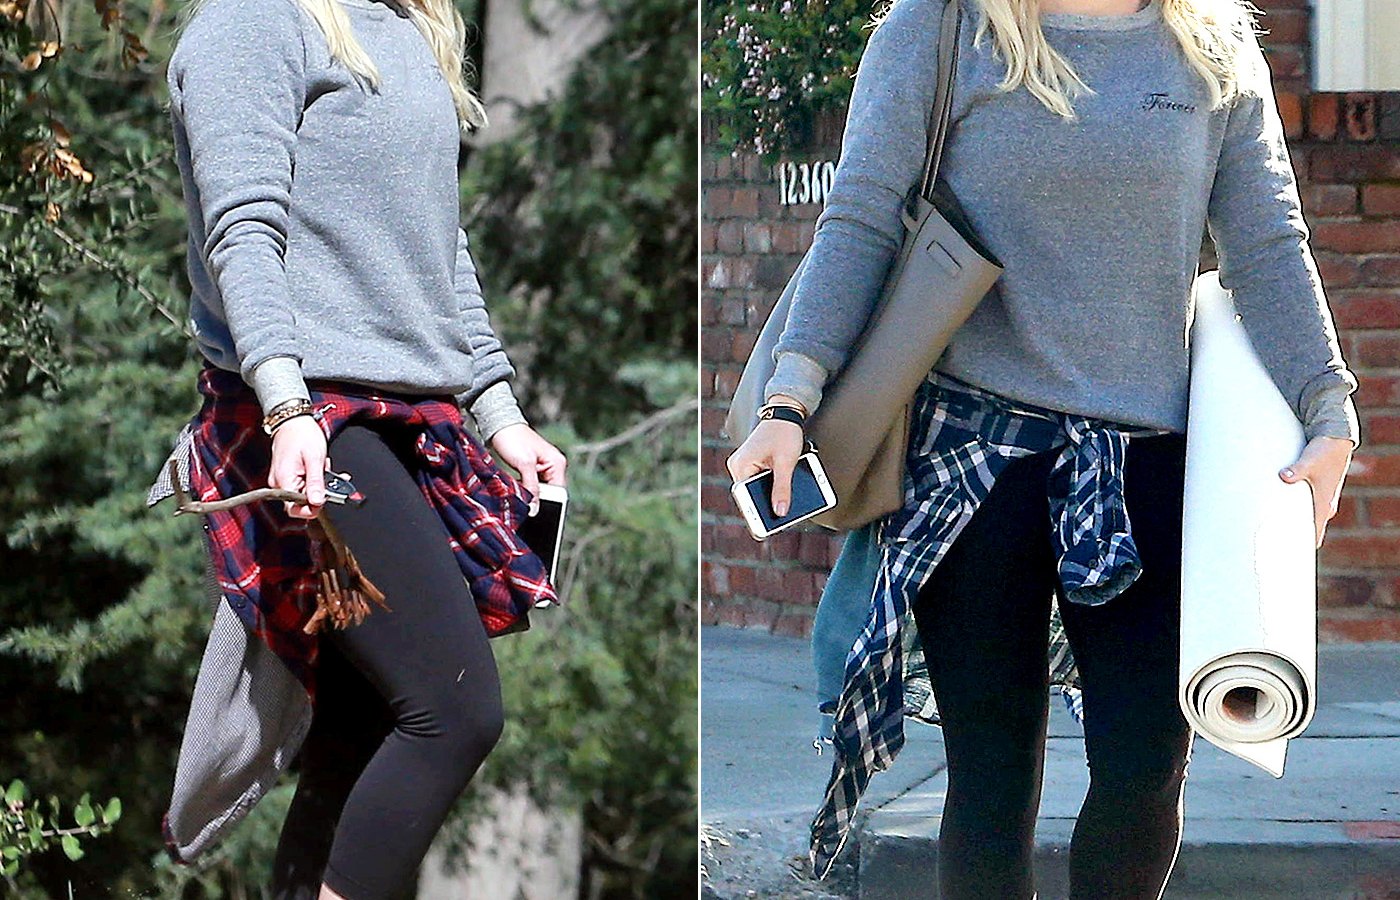 Hilary Duff on March 3, 2015.